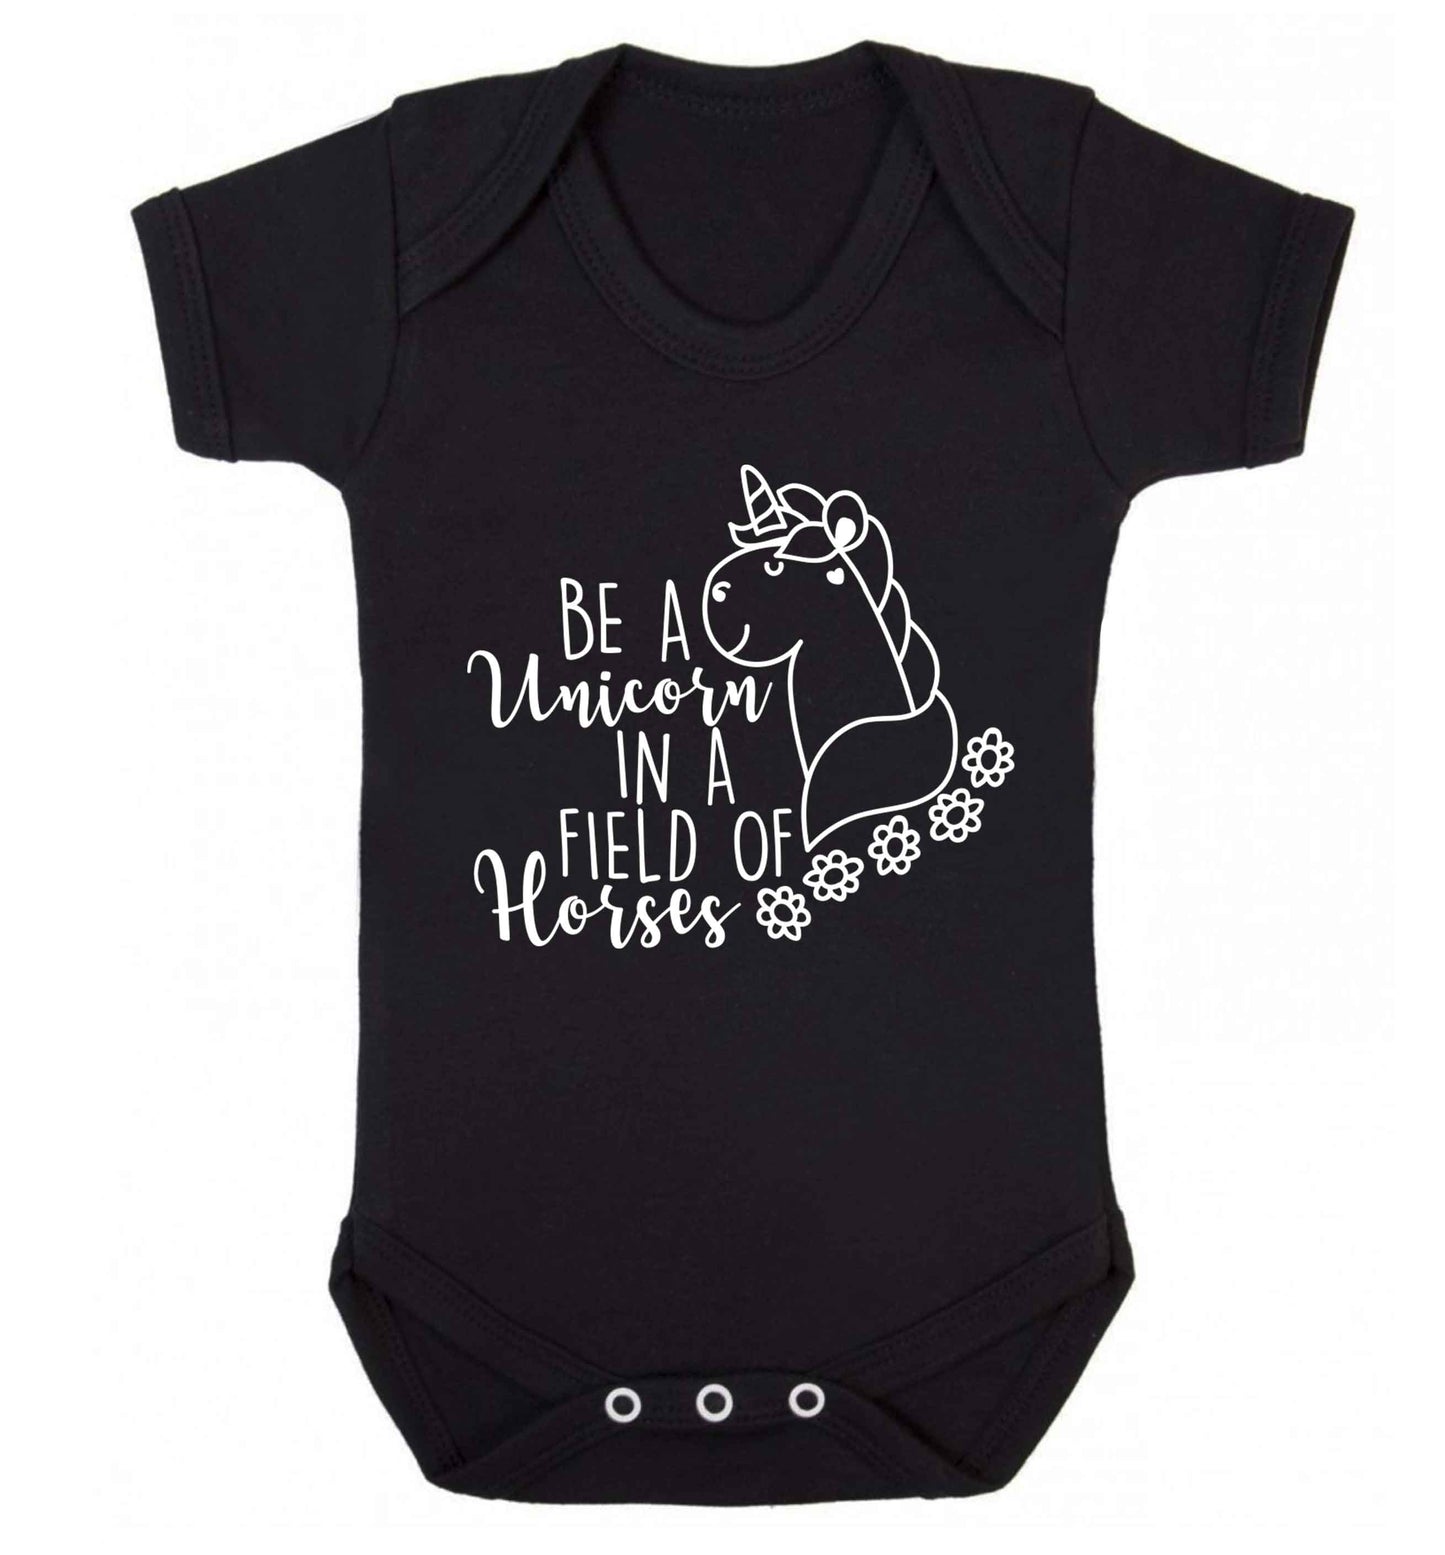 Be a unicorn in a field of horses Baby Vest black 18-24 months